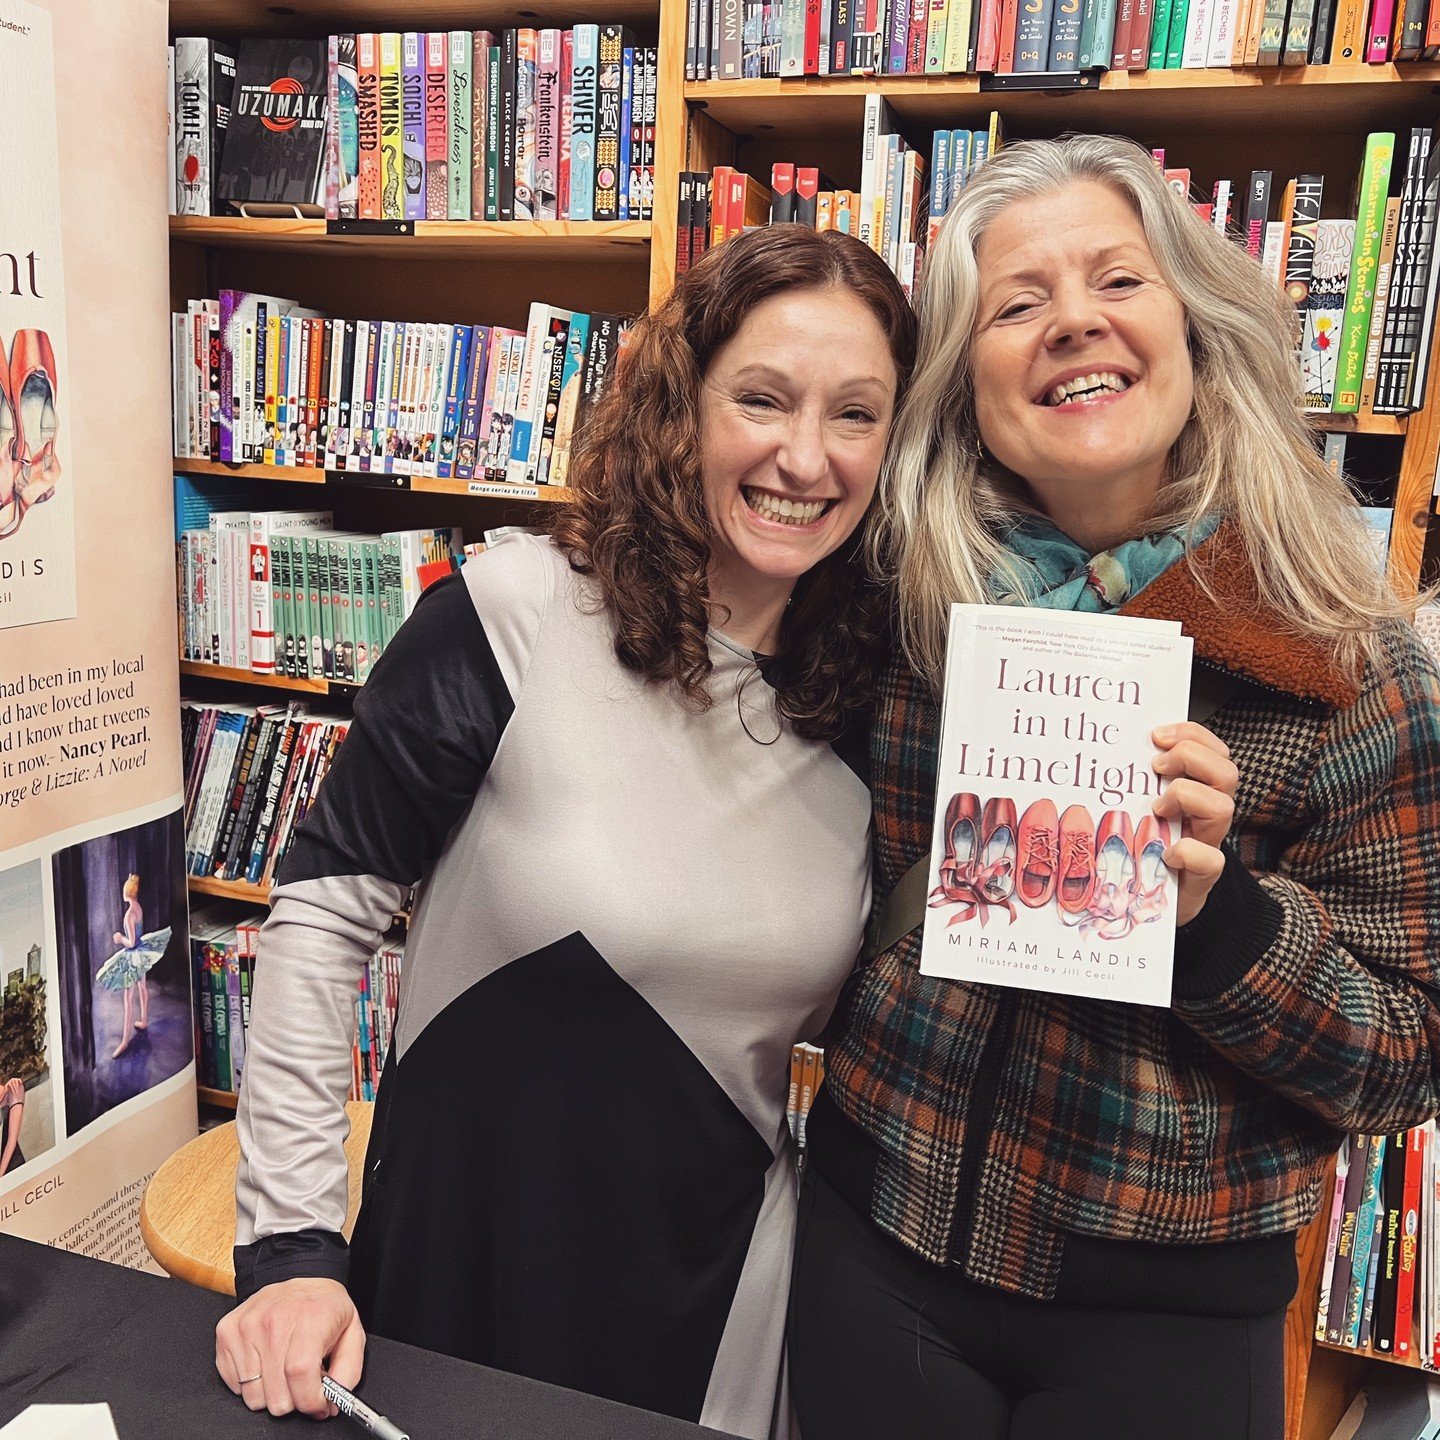 Put the dancing shoes on... 

With @ebyrnewriter at @thirdplacebooks in Seattle to celebrate @mirlandis' new book *Lauren in the Limelight* ... 

Miriam was fun and inspirational, gave us a glimpse into the joys and challenges of young folks maturing